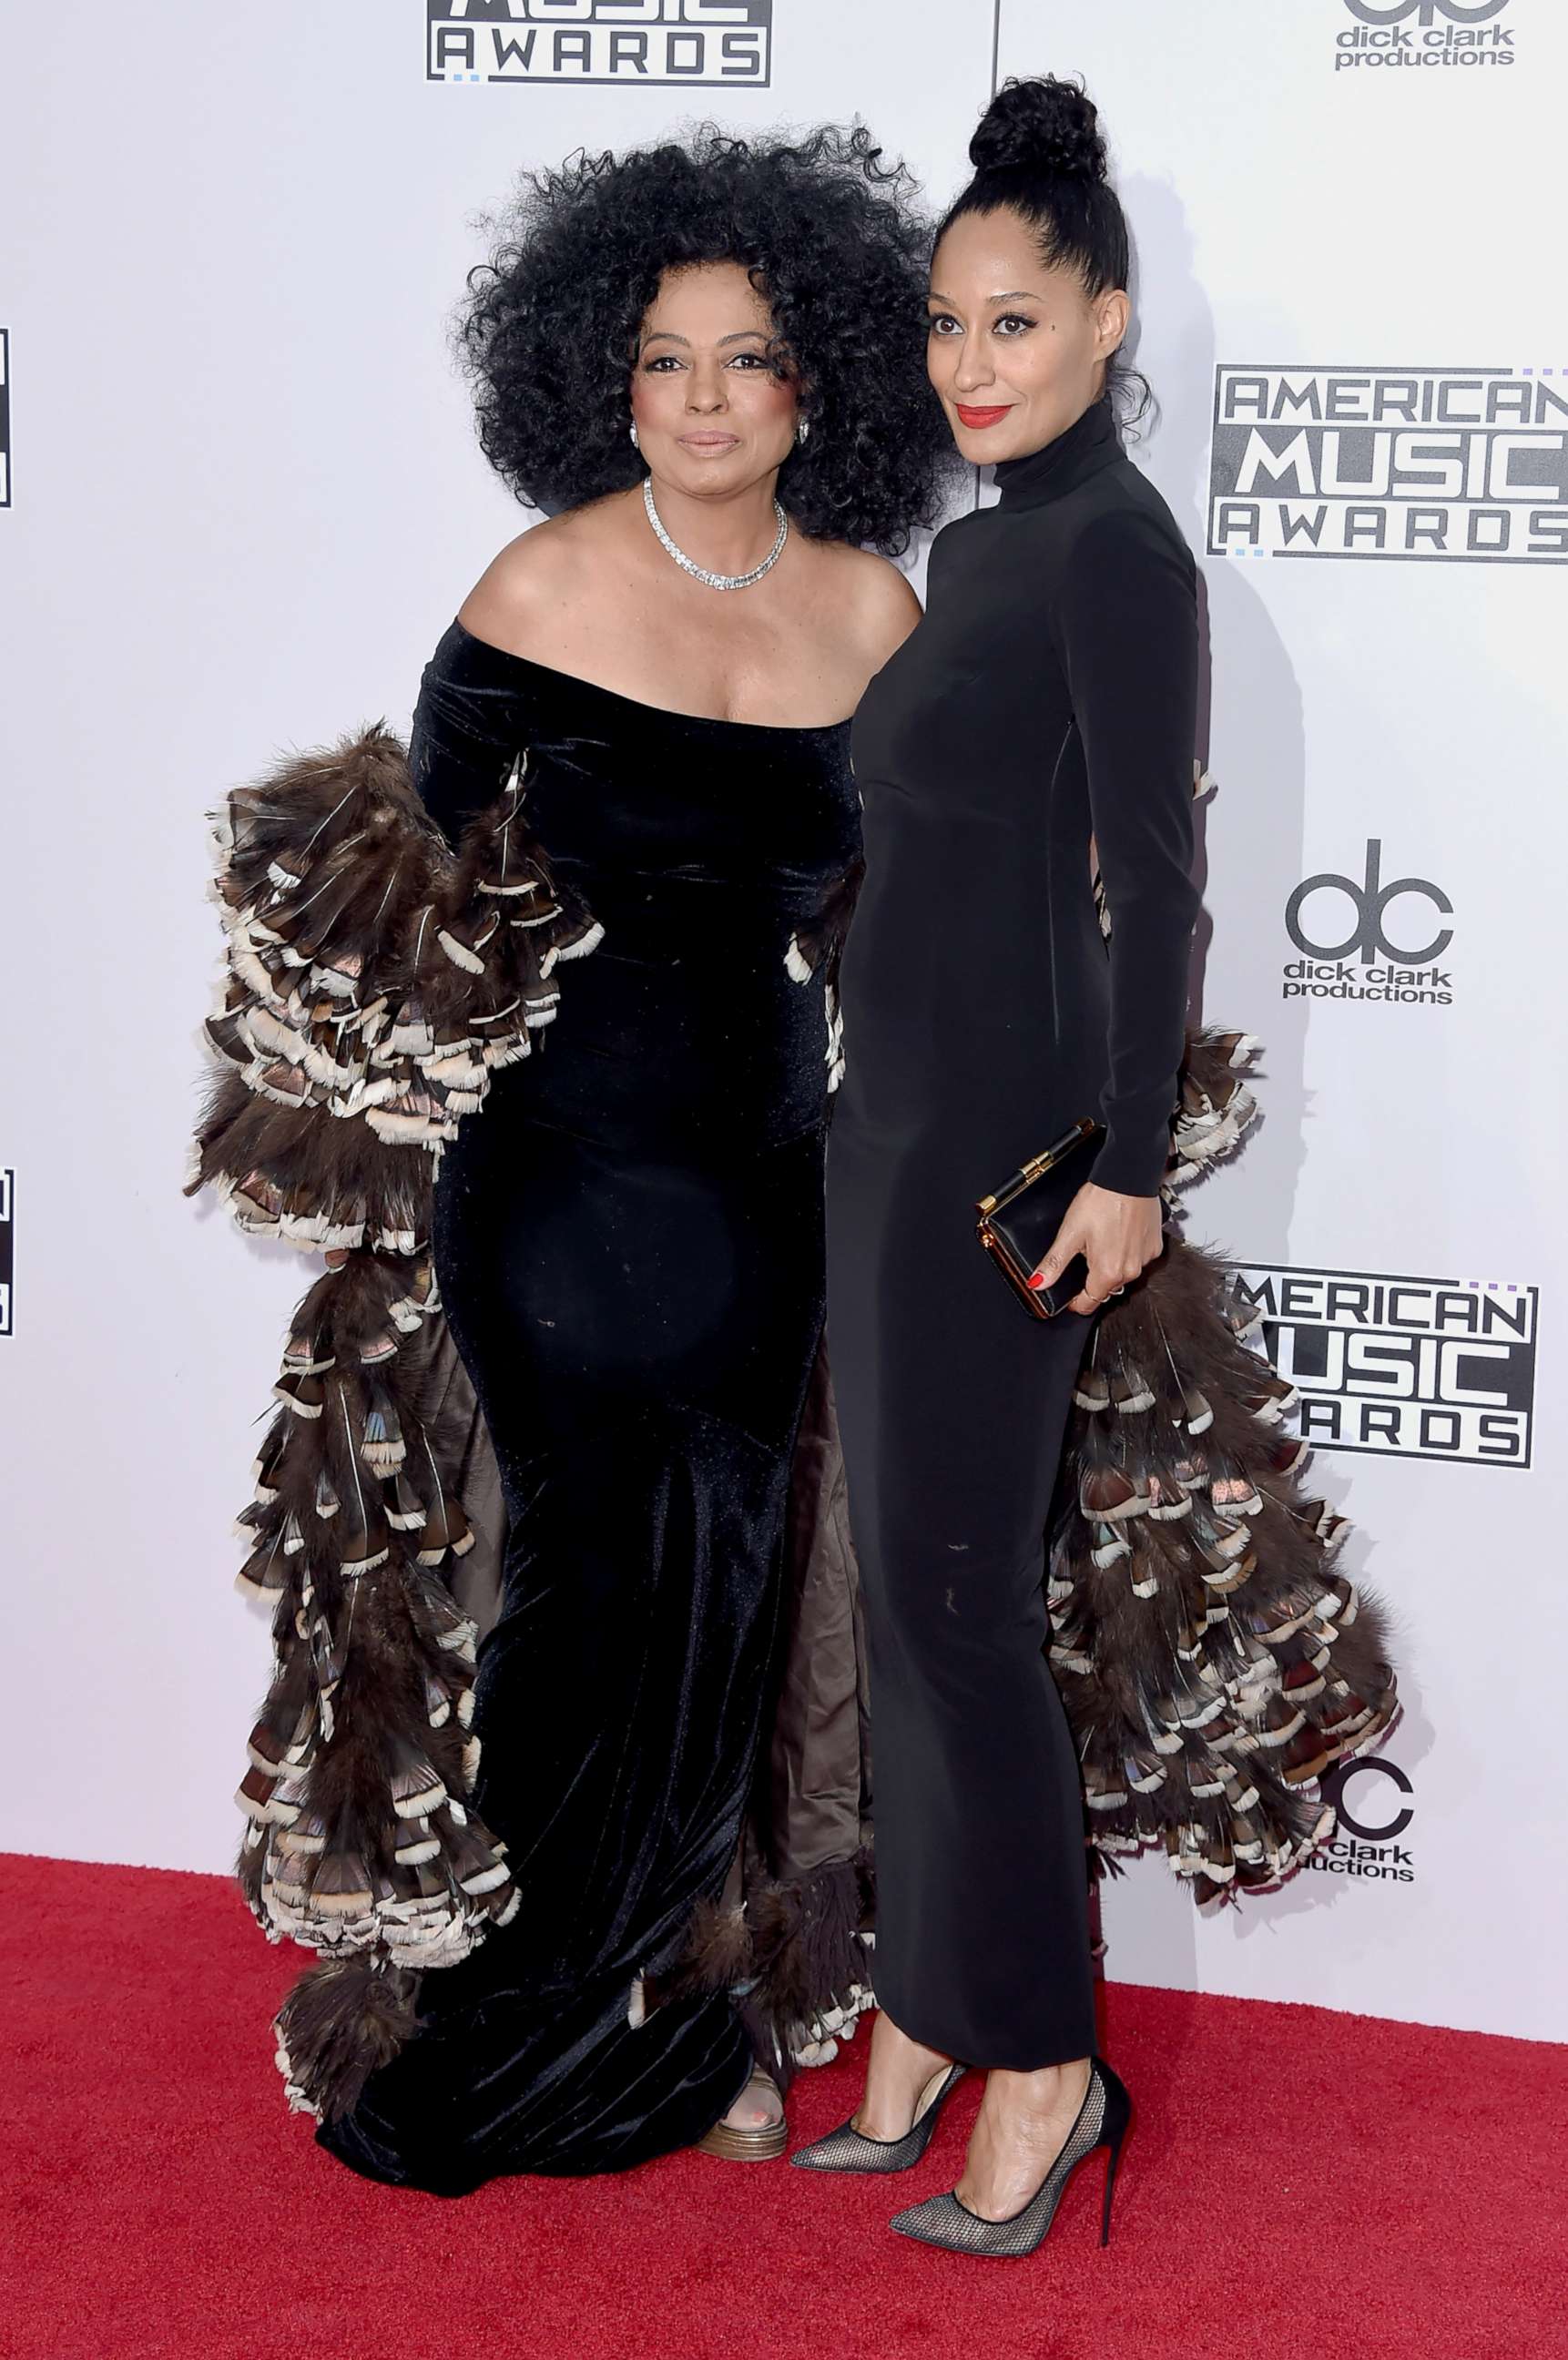 PHOTO: Diana Ross and her daughter, Tracee Ellis Ross, attend the American Music Awards on Nov. 23, 2014, in Los Angeles.